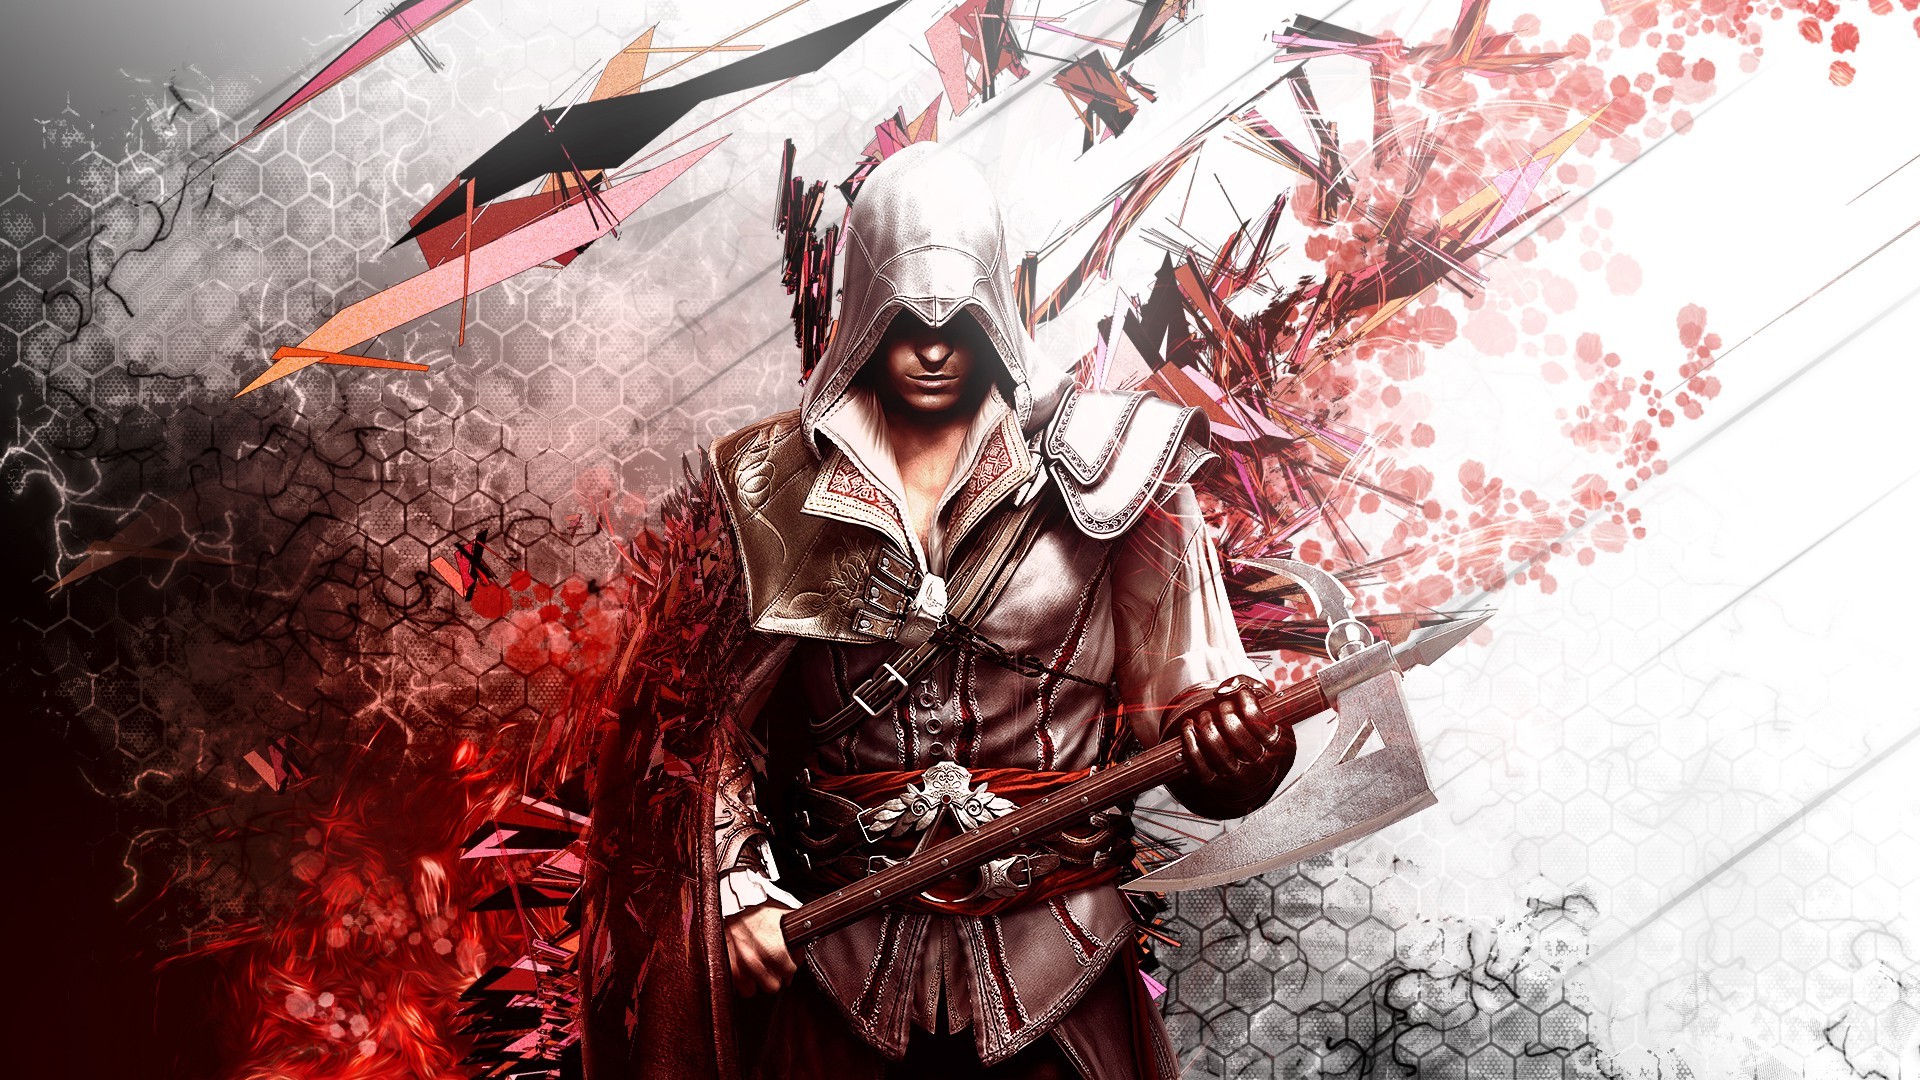 artwork-video-games-assassins-creed-2-assassins-creed-wallpapers-hd-desktop-and-mobile